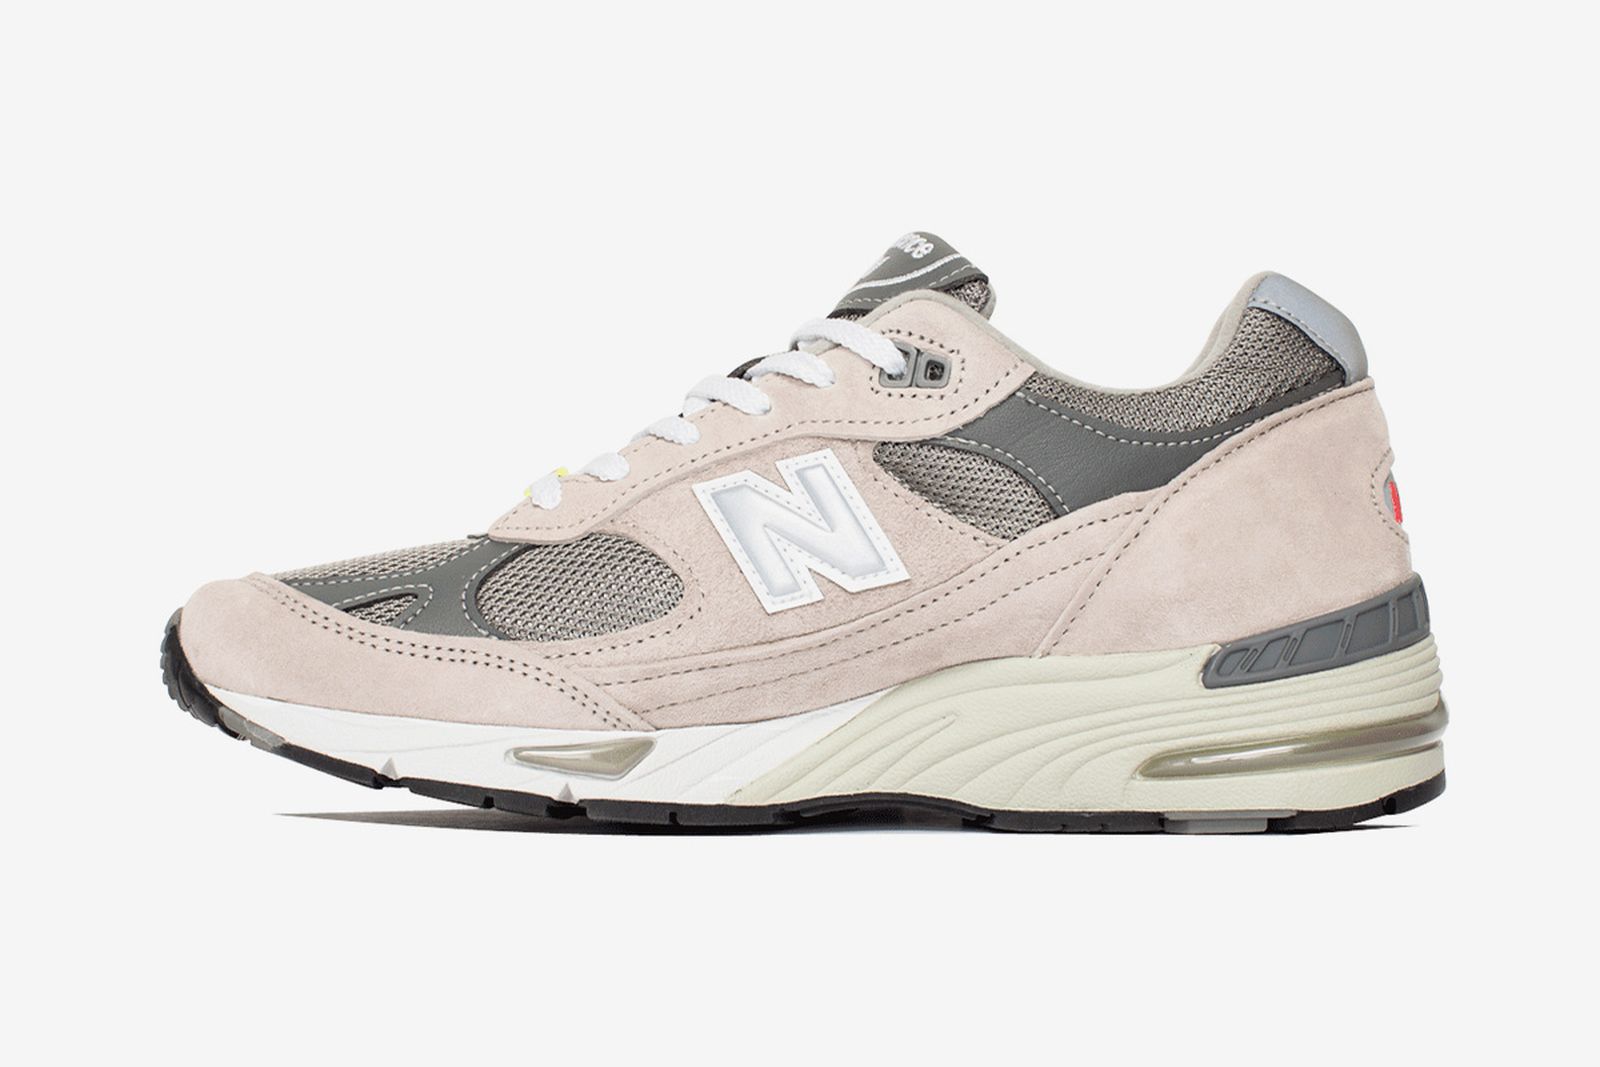 one-block-down-new-balance-991-release-date-price-02